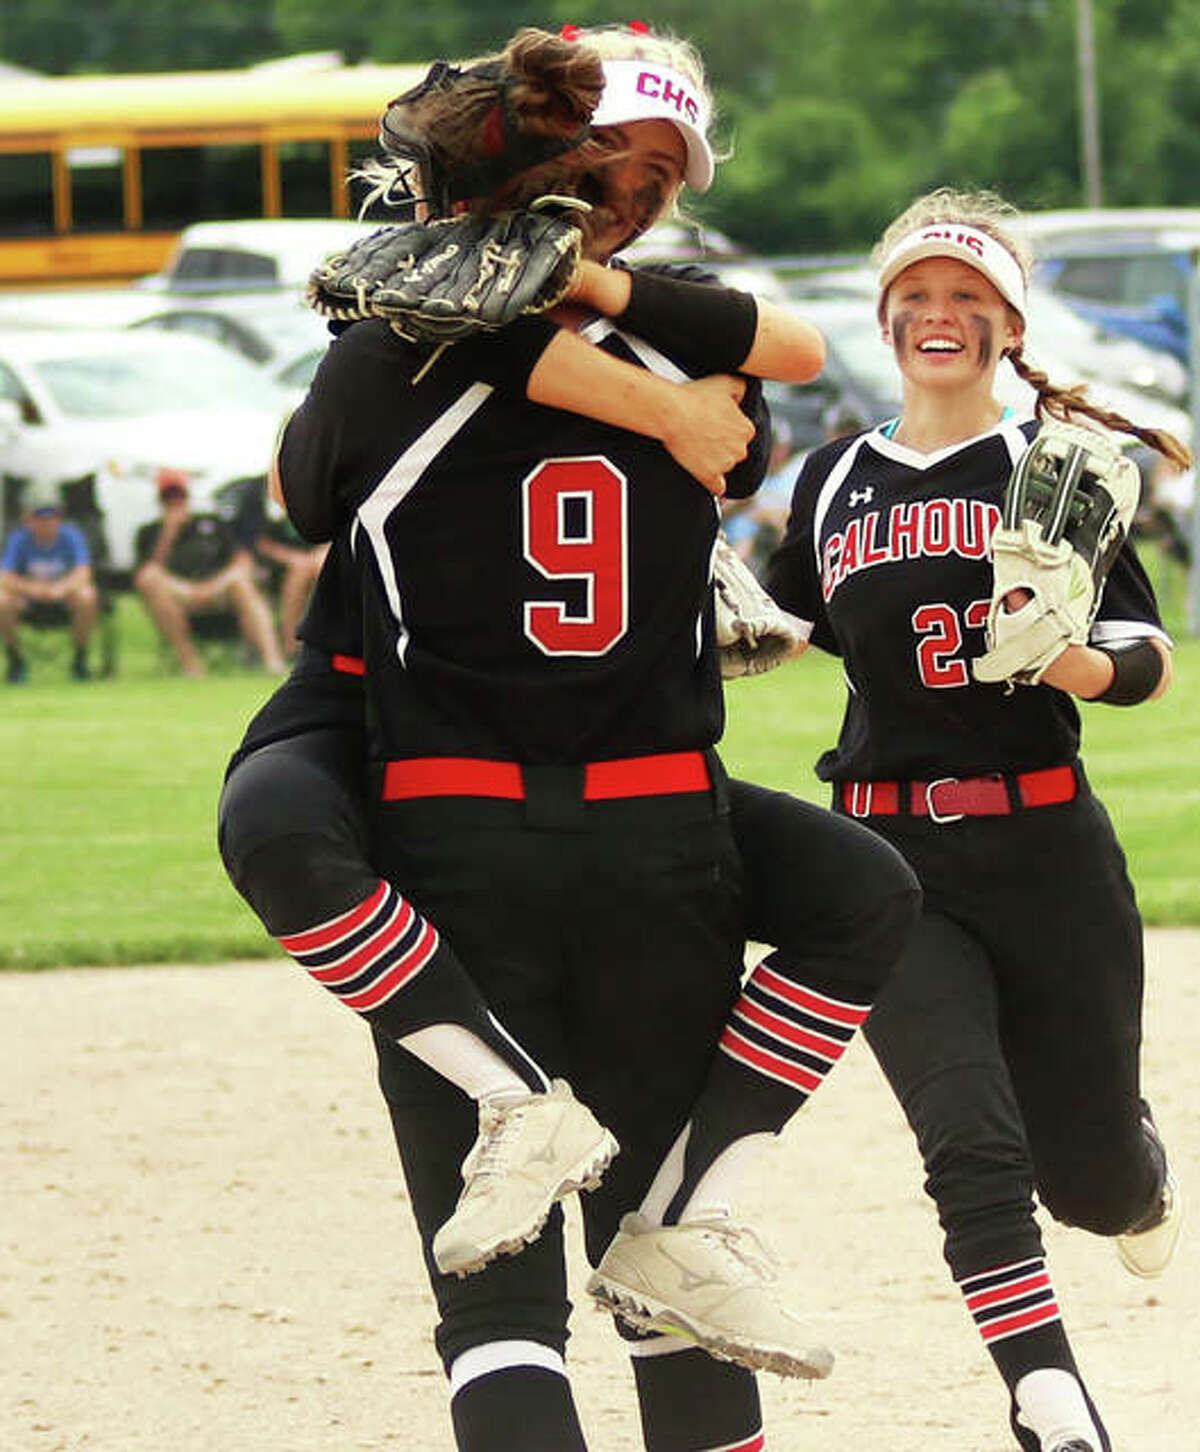 Calhoun pitcher Sydney Baalman gets a state-worthy hug from shortstop Sophie Lorton while second baseman Ashleigh Presley (right) comes to join the celebration after the Baalman’s 14th strikeout ended the game Saturday in Springfield.